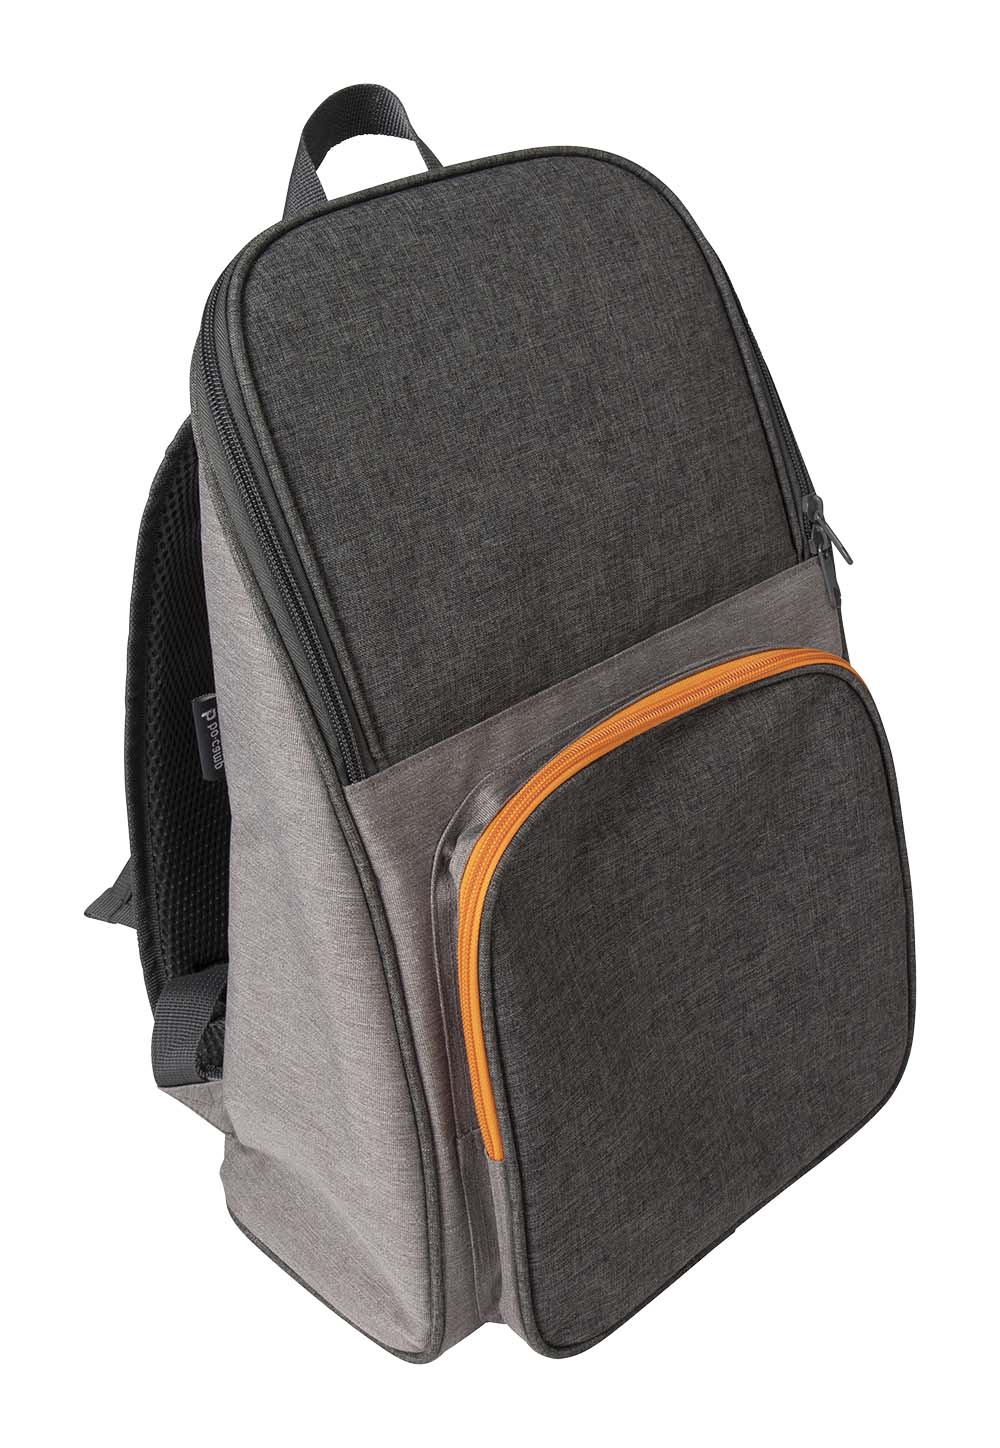 6702902 A handy backpack with cooling bag function. Has a capacity of 1 liter. Equipped with a cool compartment and a front pocket. Excellent insulation and made of two-tone 600D Oxford polyester. Ideal to take with you on a picnic or day at the beach.